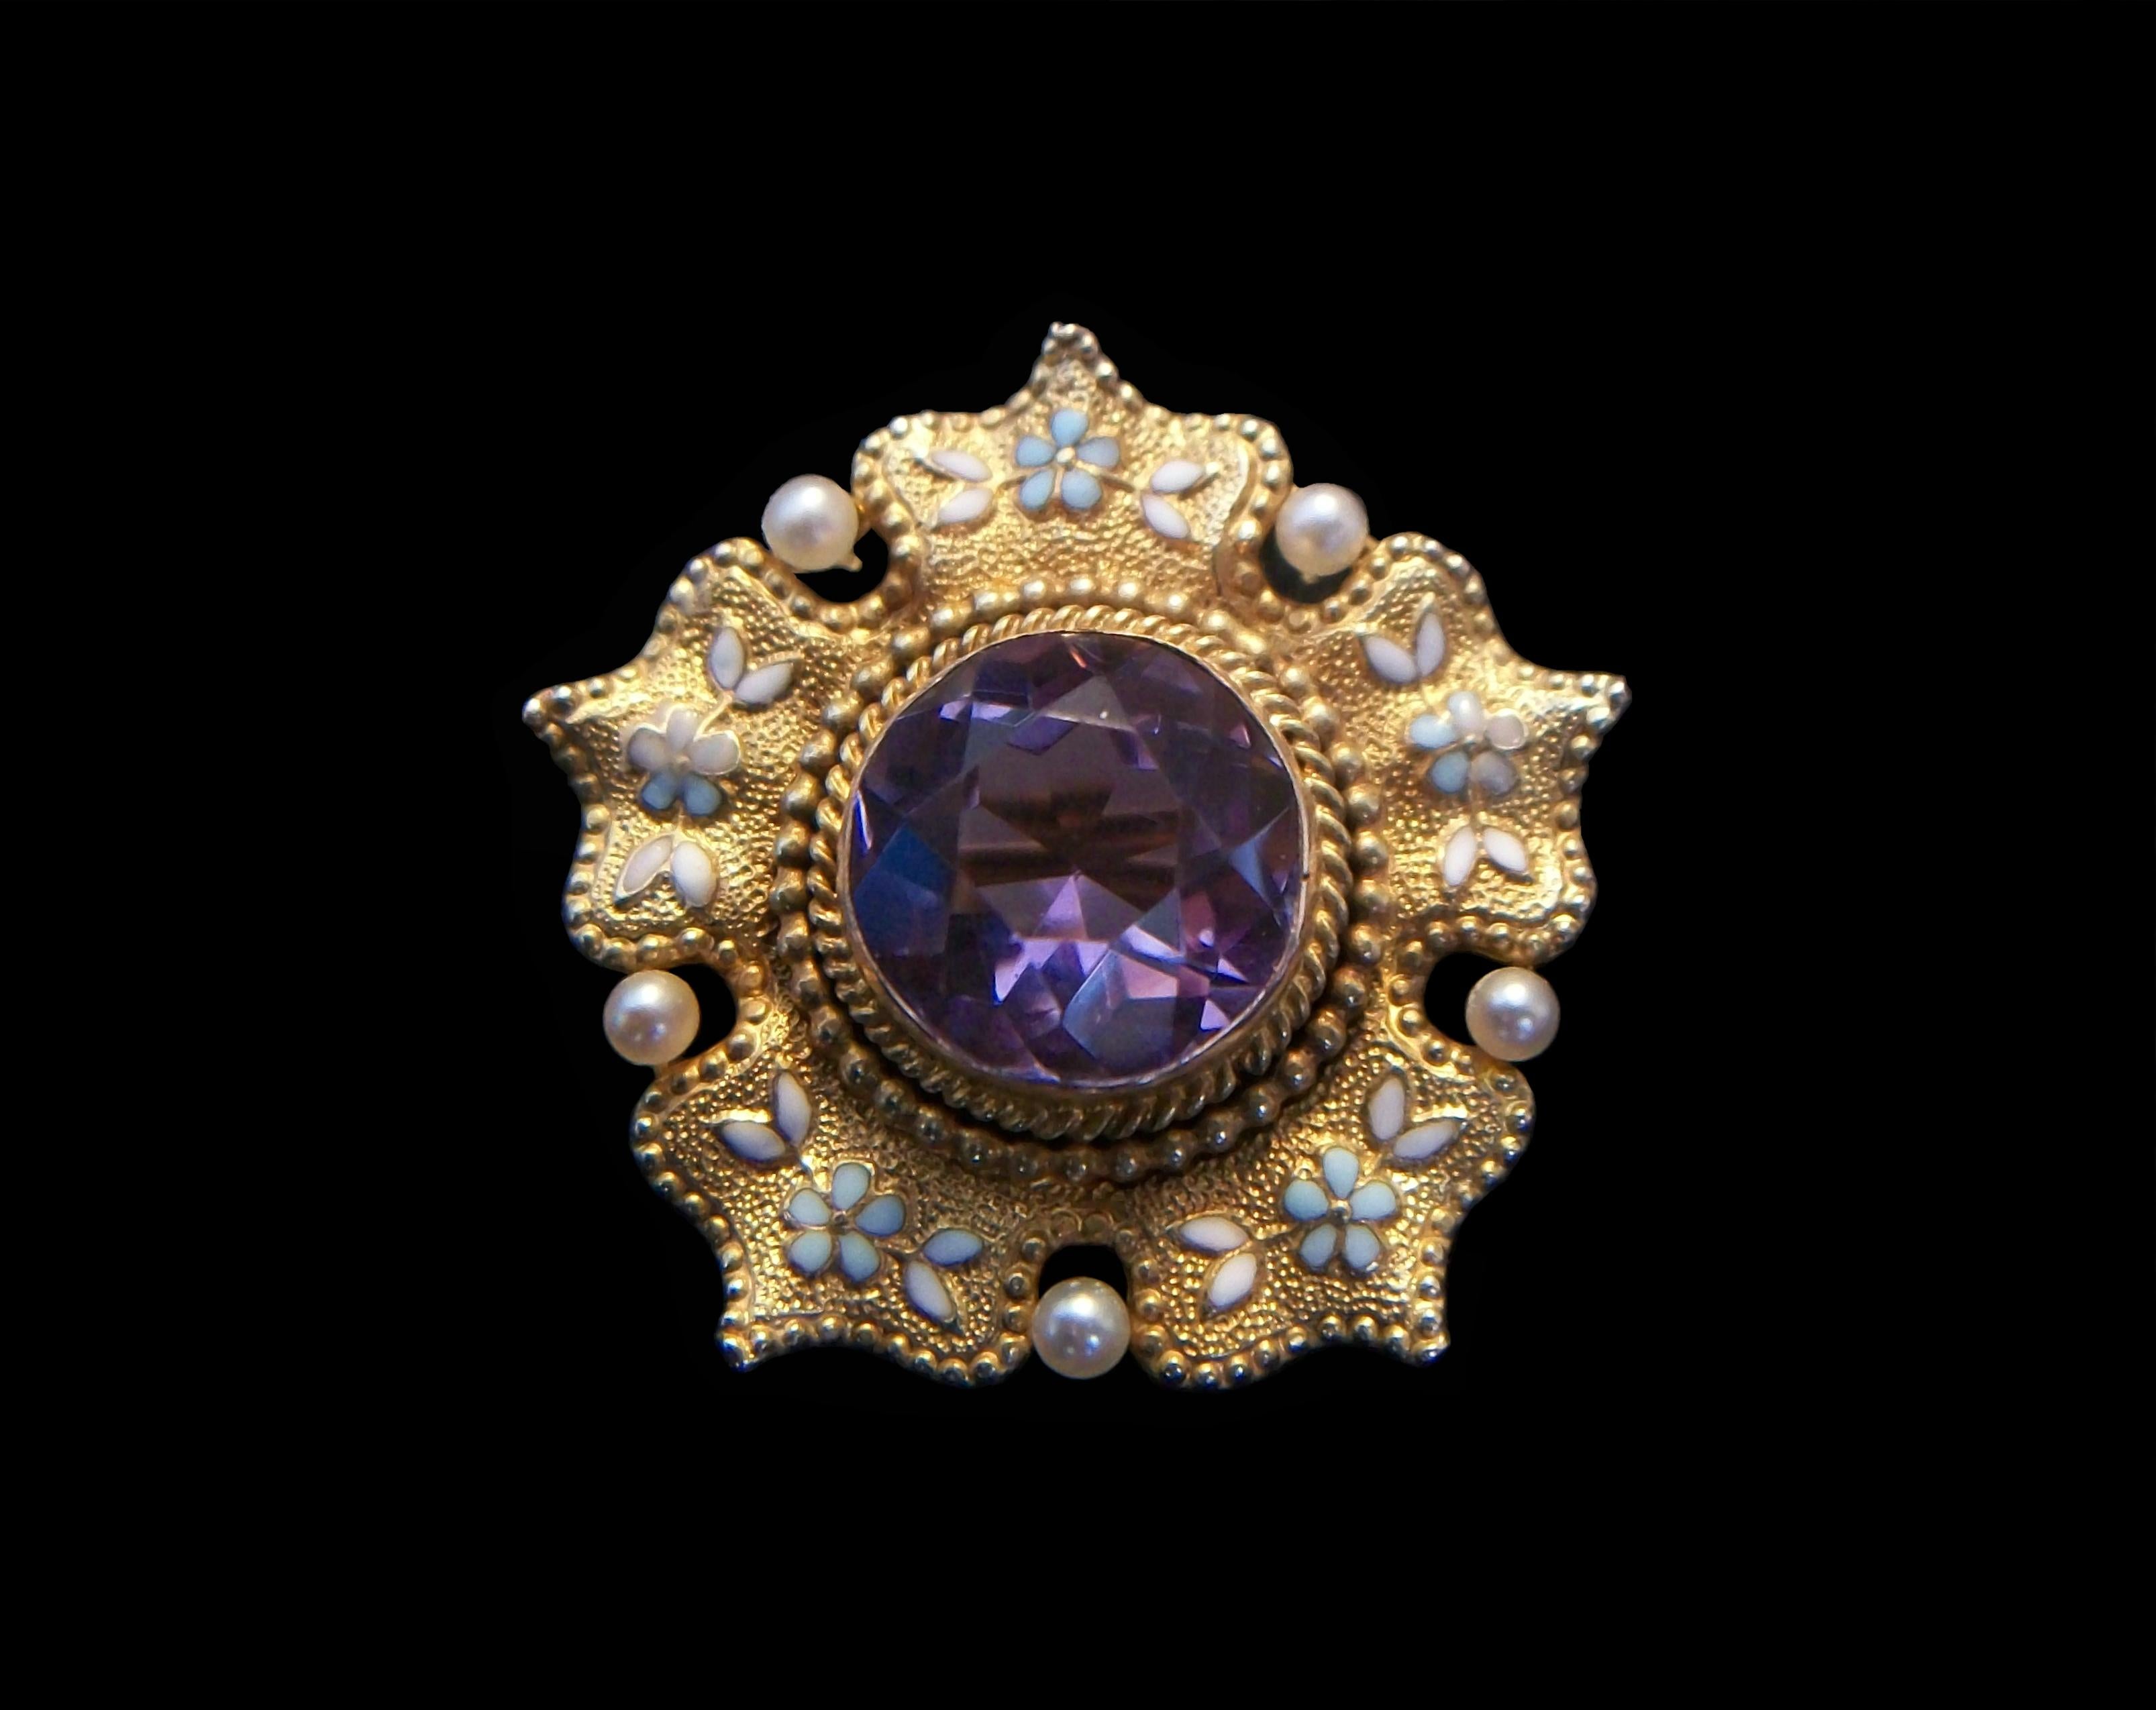 Fine antique amethyst, seed pearl and 14K yellow gold pendant or brooch with blue and white 'forget-me-knot' enamel flowers and leaves - featuring a round bezel set amethyst to the center (approx. 2.71 total carat weight - 10 mm. diameter x 6 mm.